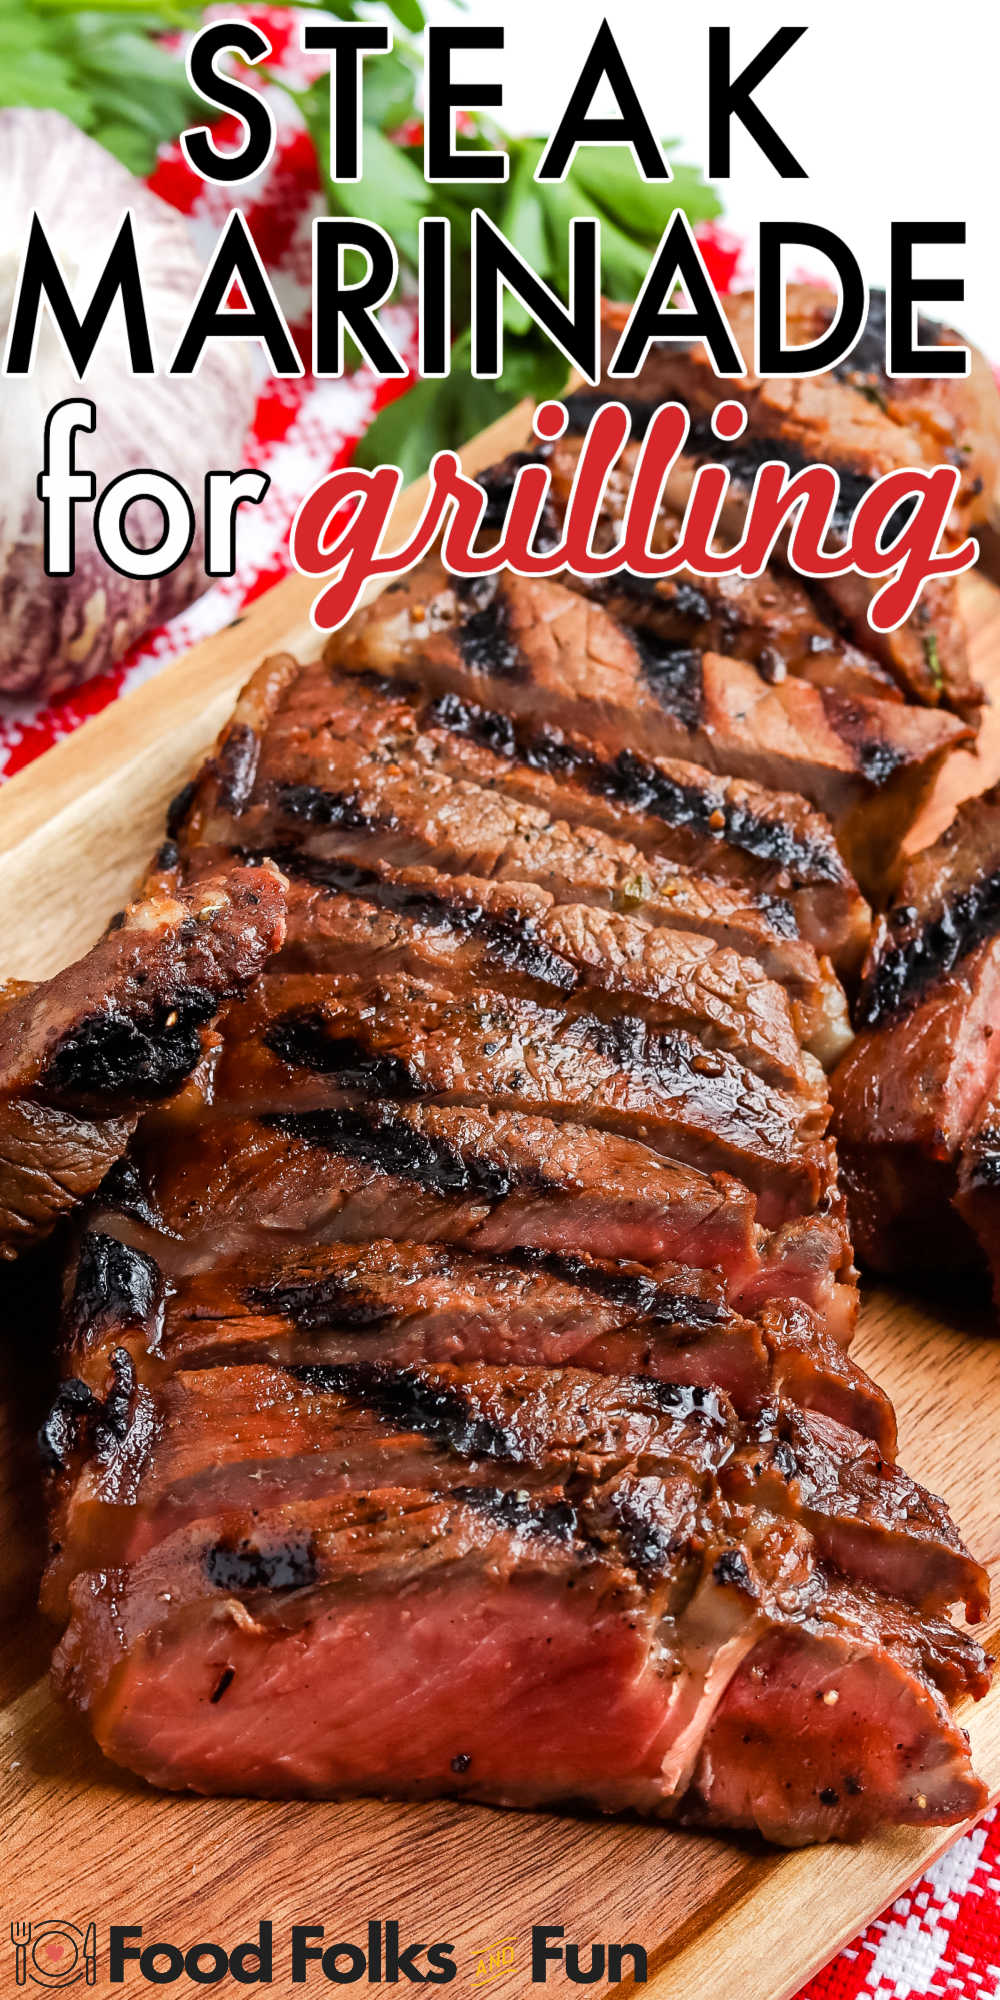 This easy Steak Marinade For Grilling makes flavorful and juicy steaks every time. It’s perfect for strip steak, skirt steak, flank steak, sirloin, kabobs, and more. via @foodfolksandfun